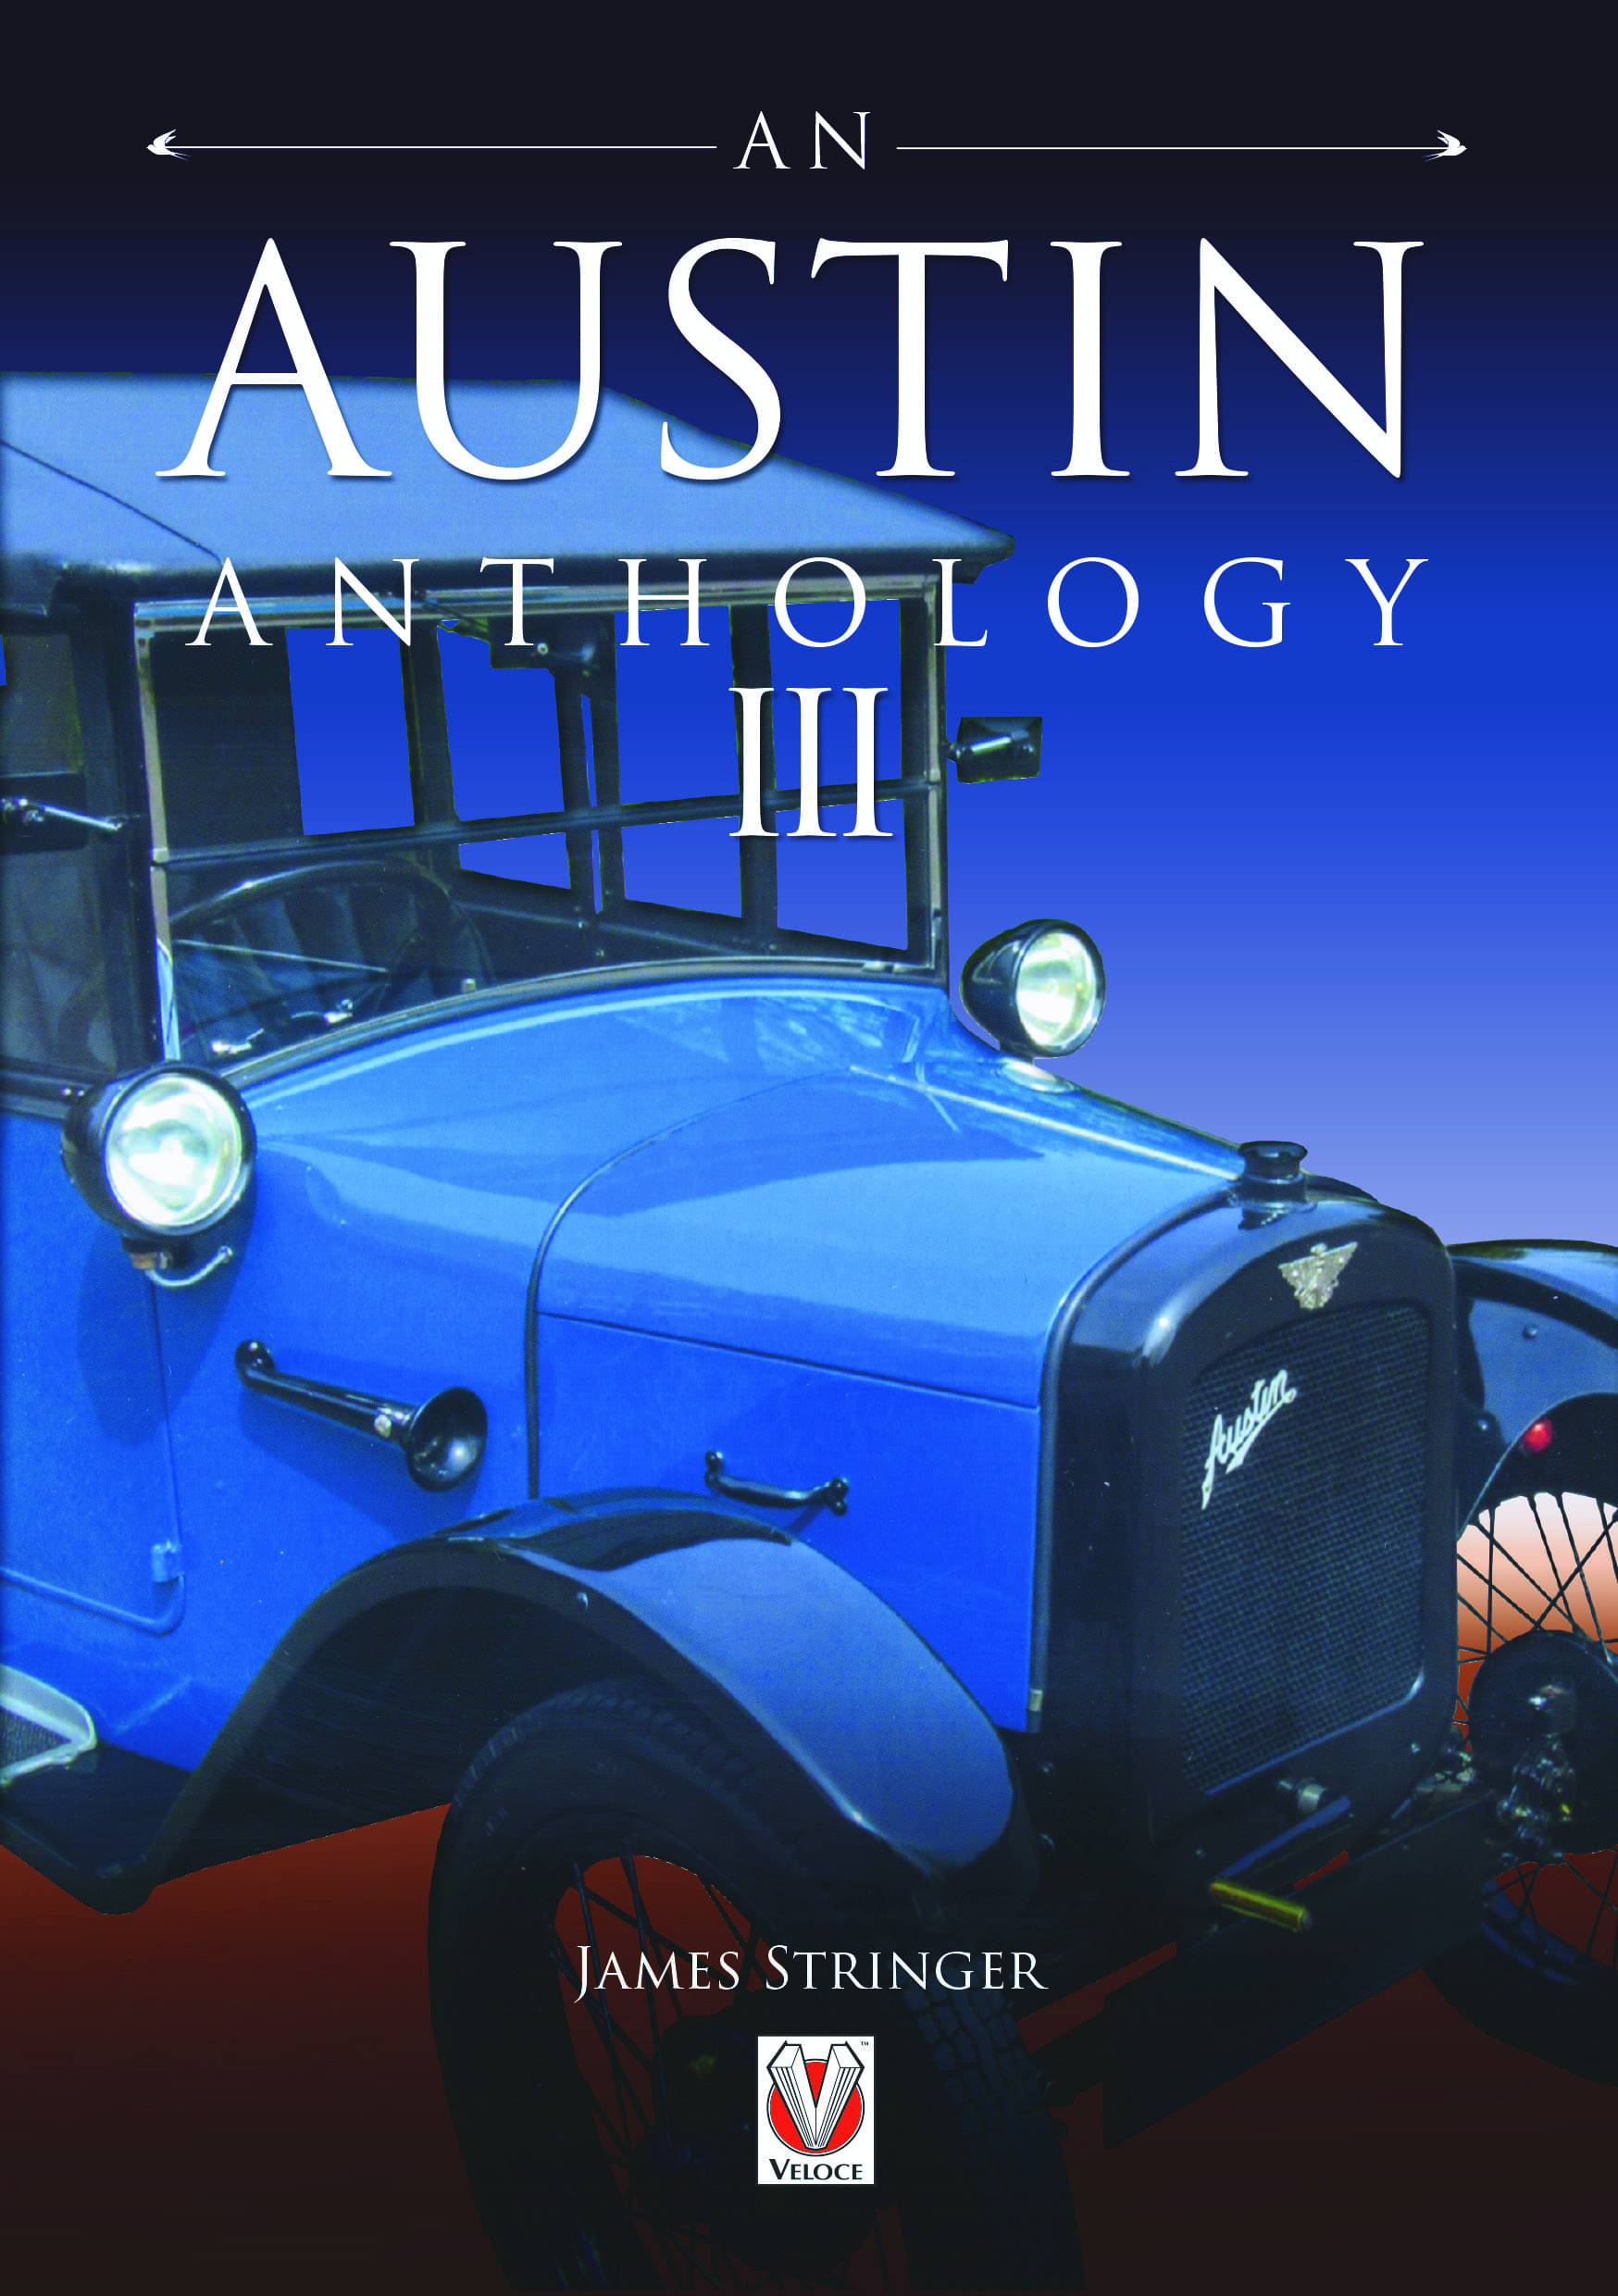 An Austin Anthology III cover